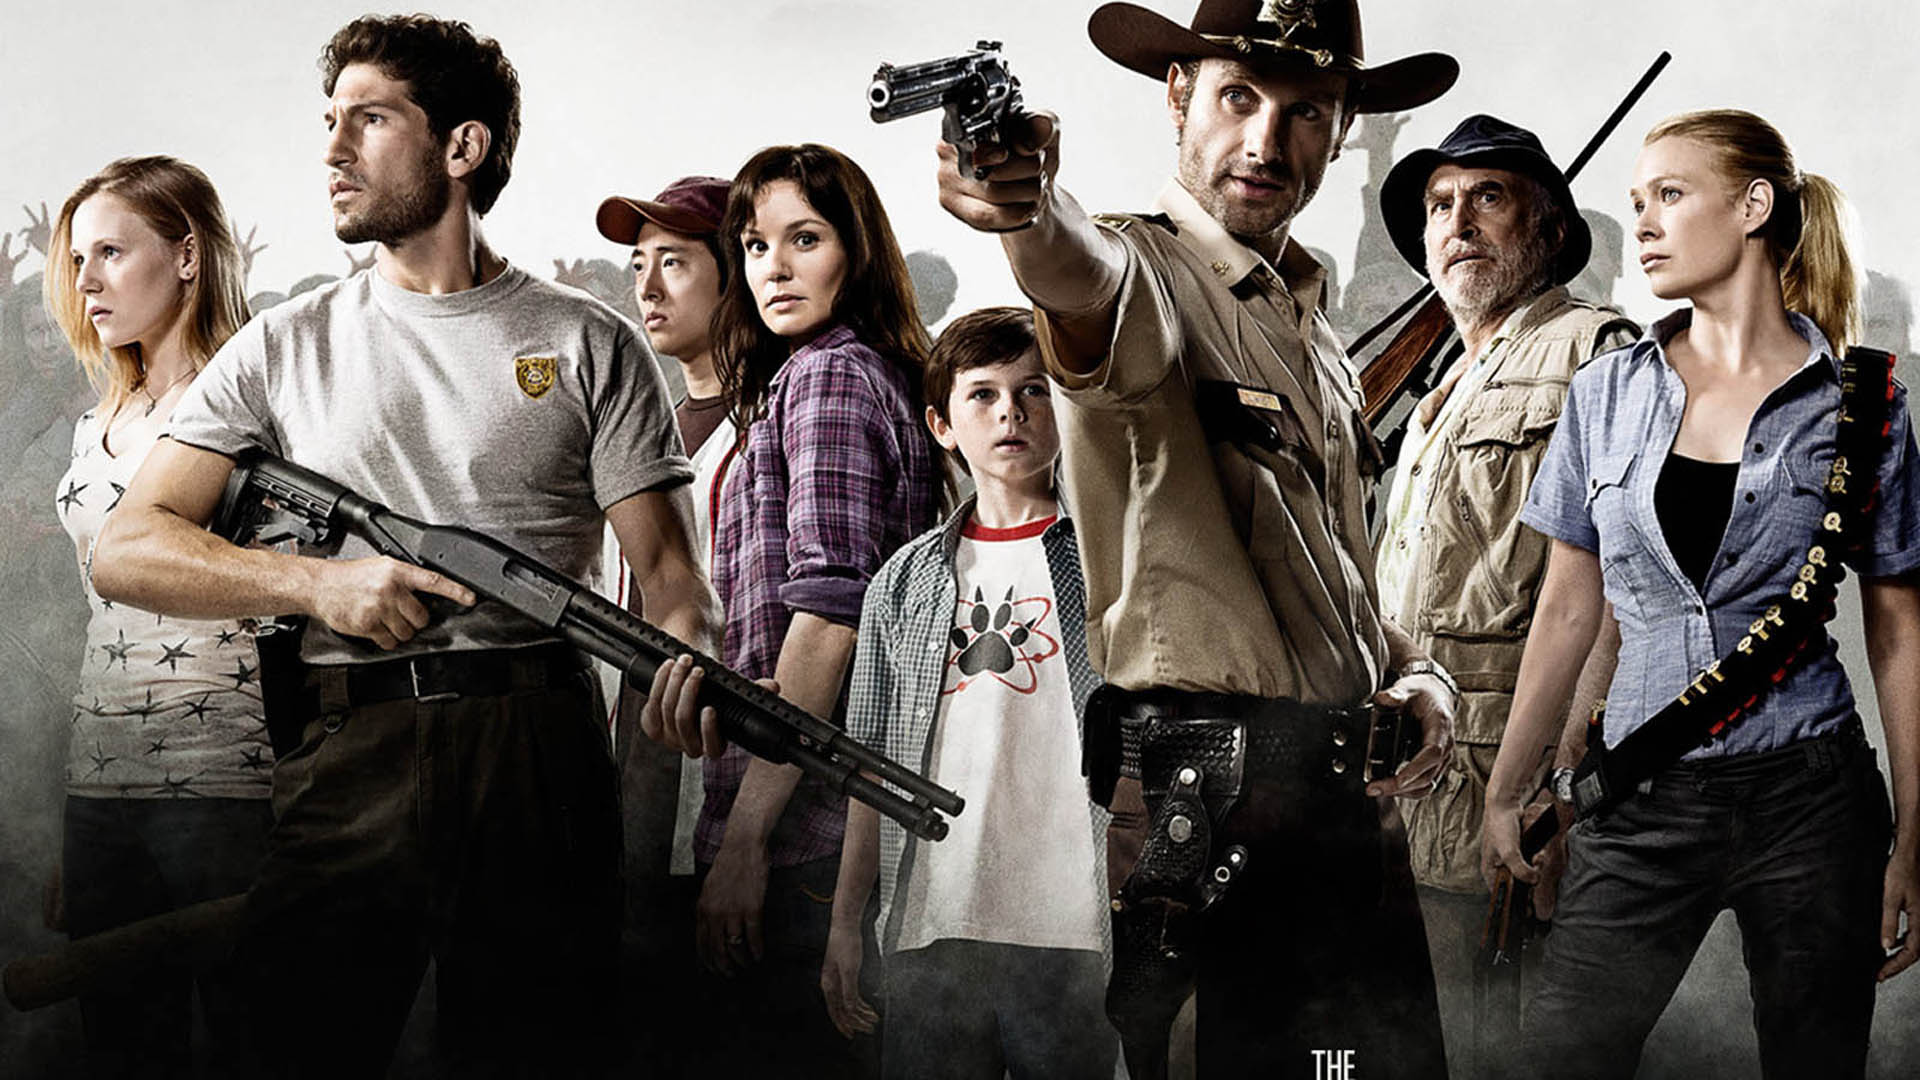 The Walking Dead Poster 1920x1080 Wallpapers, 1920x1080 Wallpapers ...